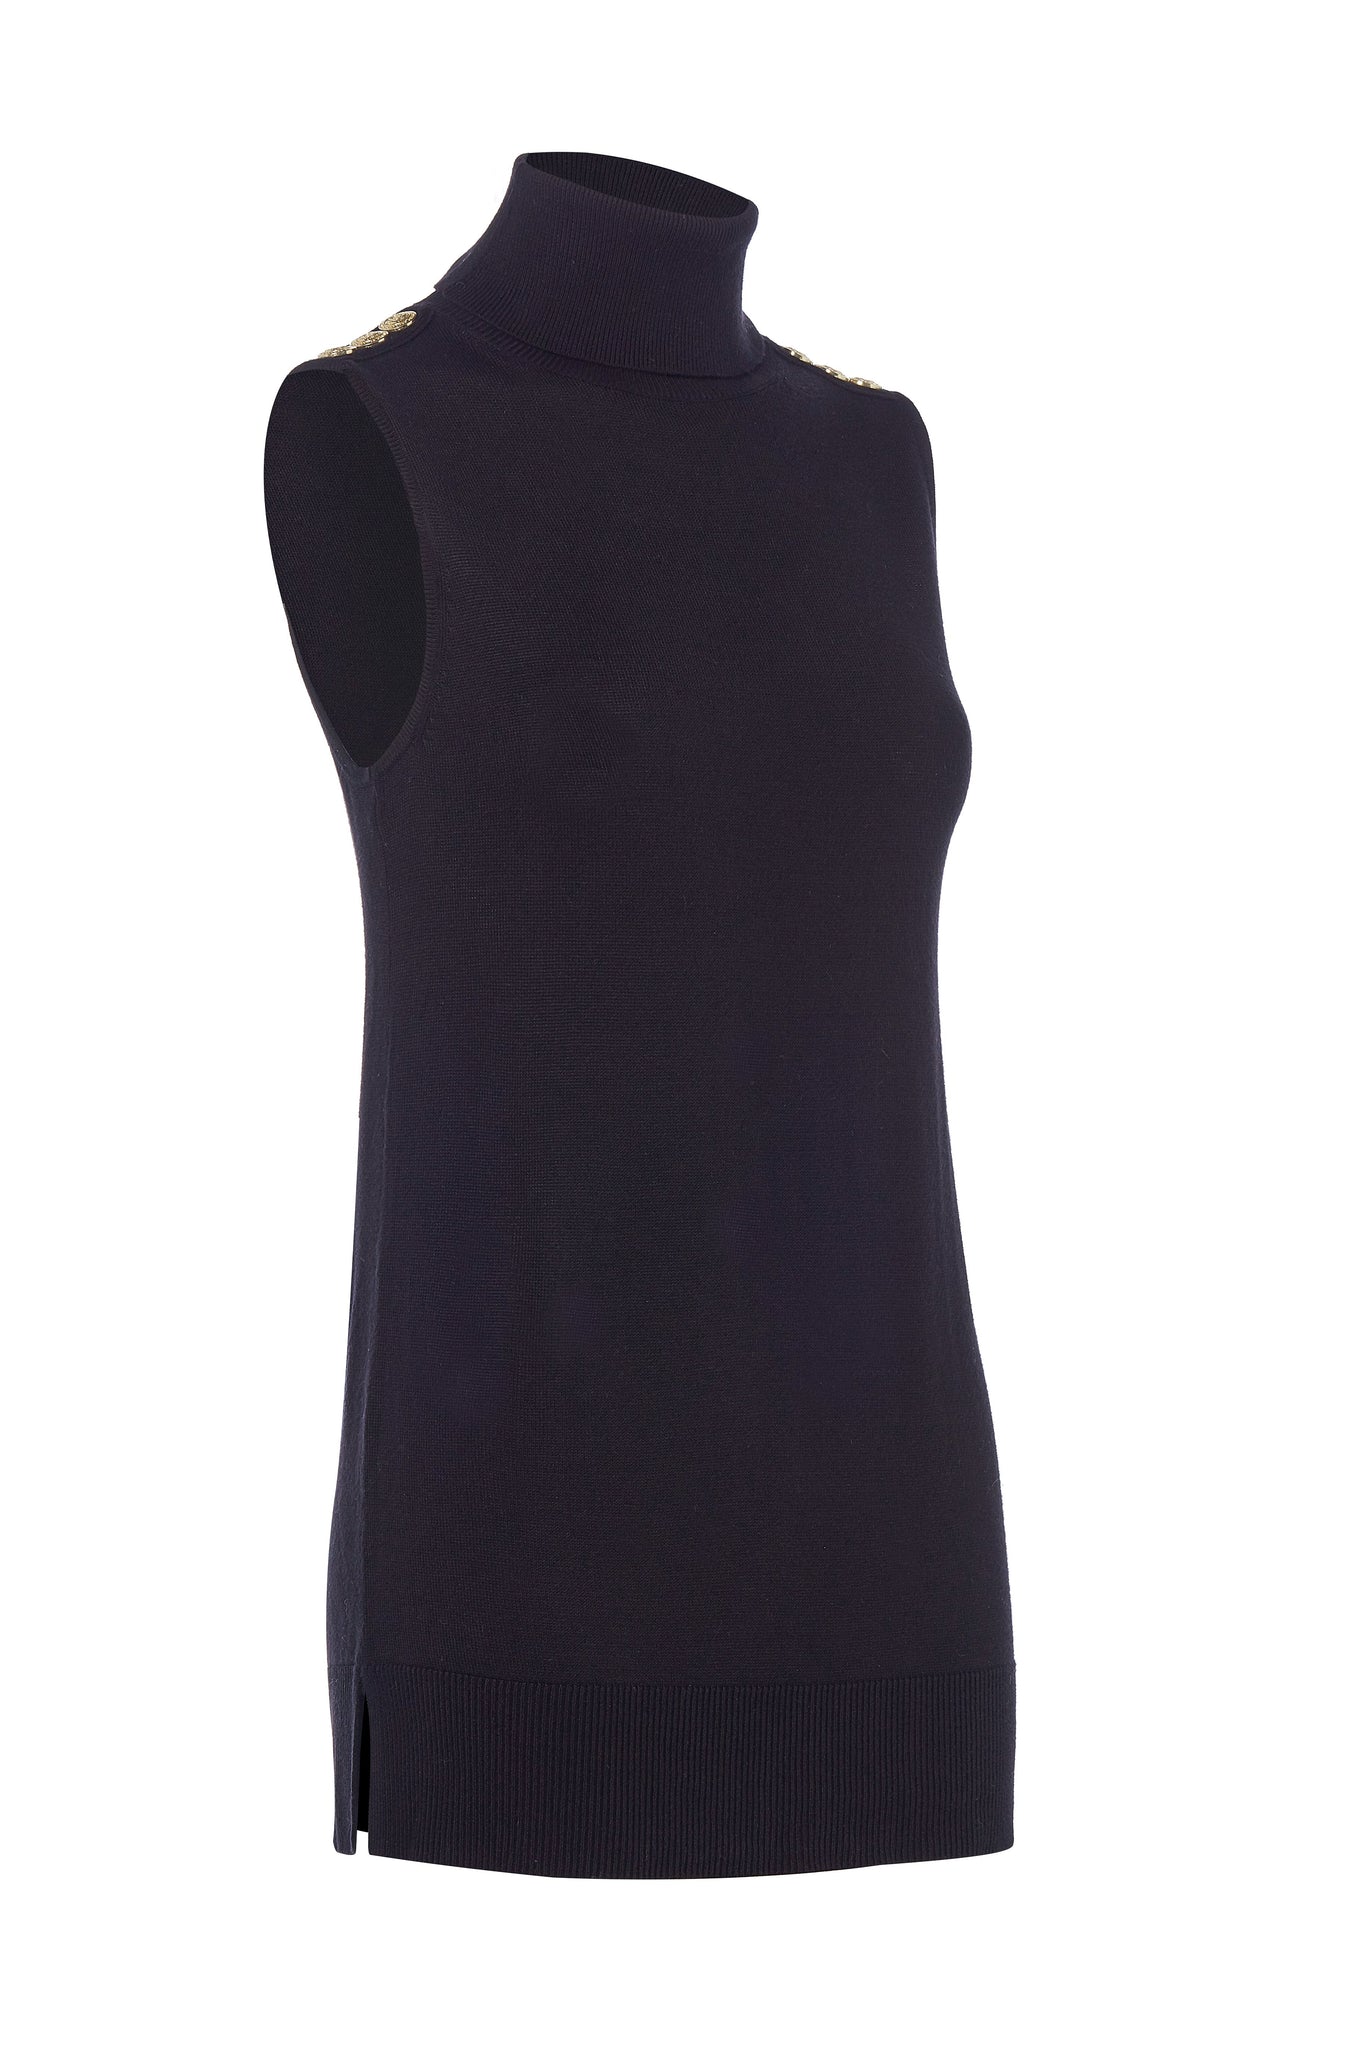 fitted lightweight sleeveless rollneck knit in black with gold button detail across shoulders